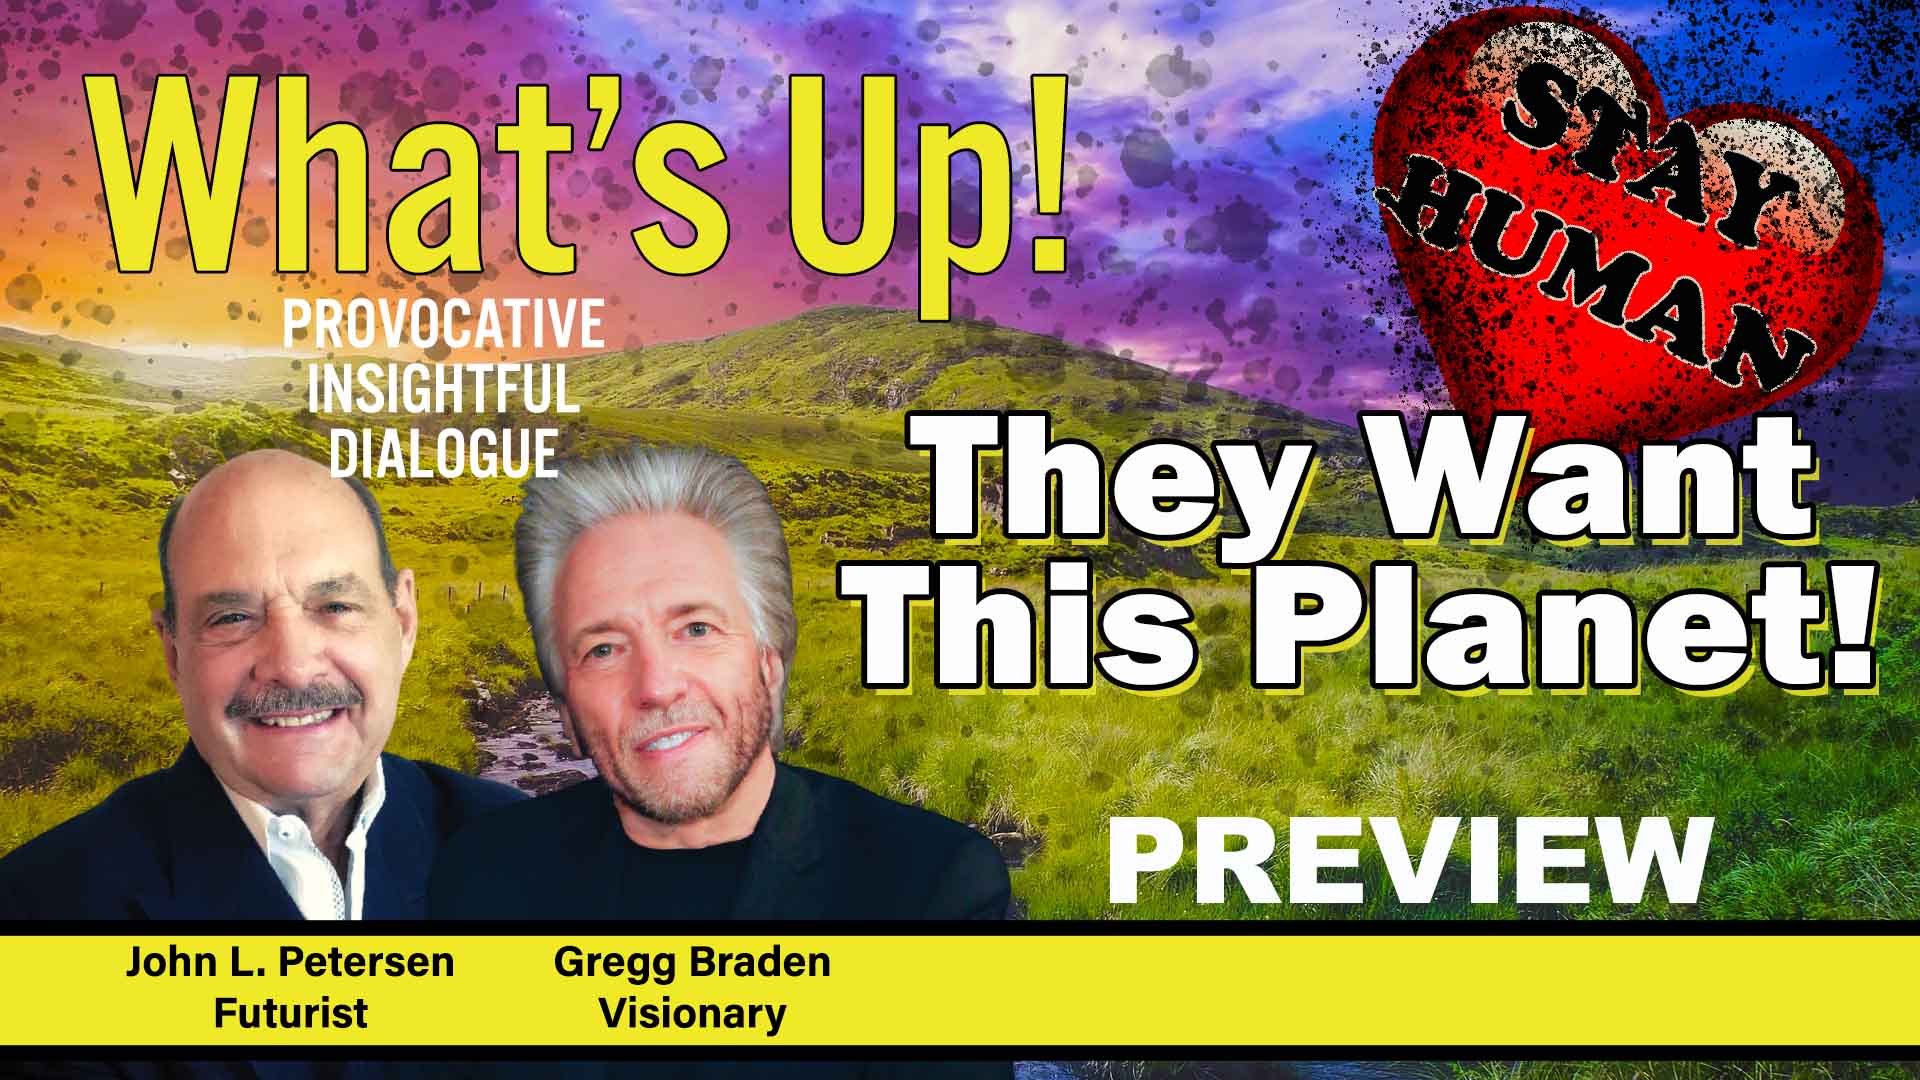 What's Up! Preview - They Want This Planet with Gregg Braden, John Petersen